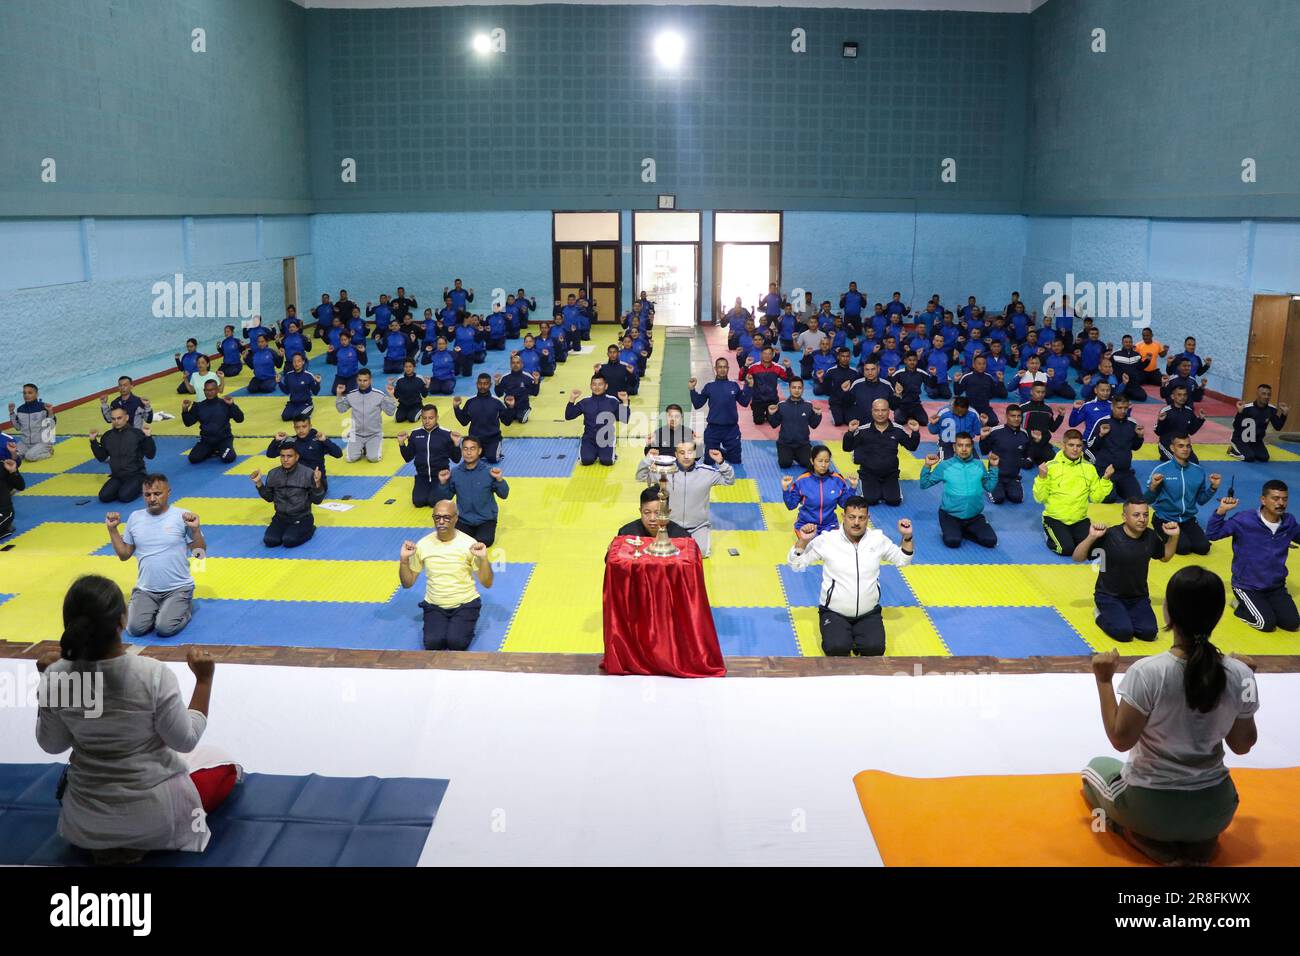 https://c8.alamy.com/comp/2R8FKWX/on-june-21-2023-in-kathmandu-nepal-members-of-the-nepal-police-perform-yoga-postures-while-taking-part-in-a-session-during-international-yoga-day-at-the-national-police-academy-headquarters-international-yoga-day-has-been-celebrated-every-year-on-june-21-since-2015-hundreds-of-millions-of-people-worldwide-perform-yoga-to-mark-the-day-this-years-international-yoga-day-was-celebrated-with-the-theme-of-yoga-for-vasudhaiva-kutumbakam-which-perfectly-captures-our-shared-desire-for-one-earth-one-family-and-one-future-the-main-aim-of-yoga-day-is-to-raise-awareness-about-the-n-2R8FKWX.jpg